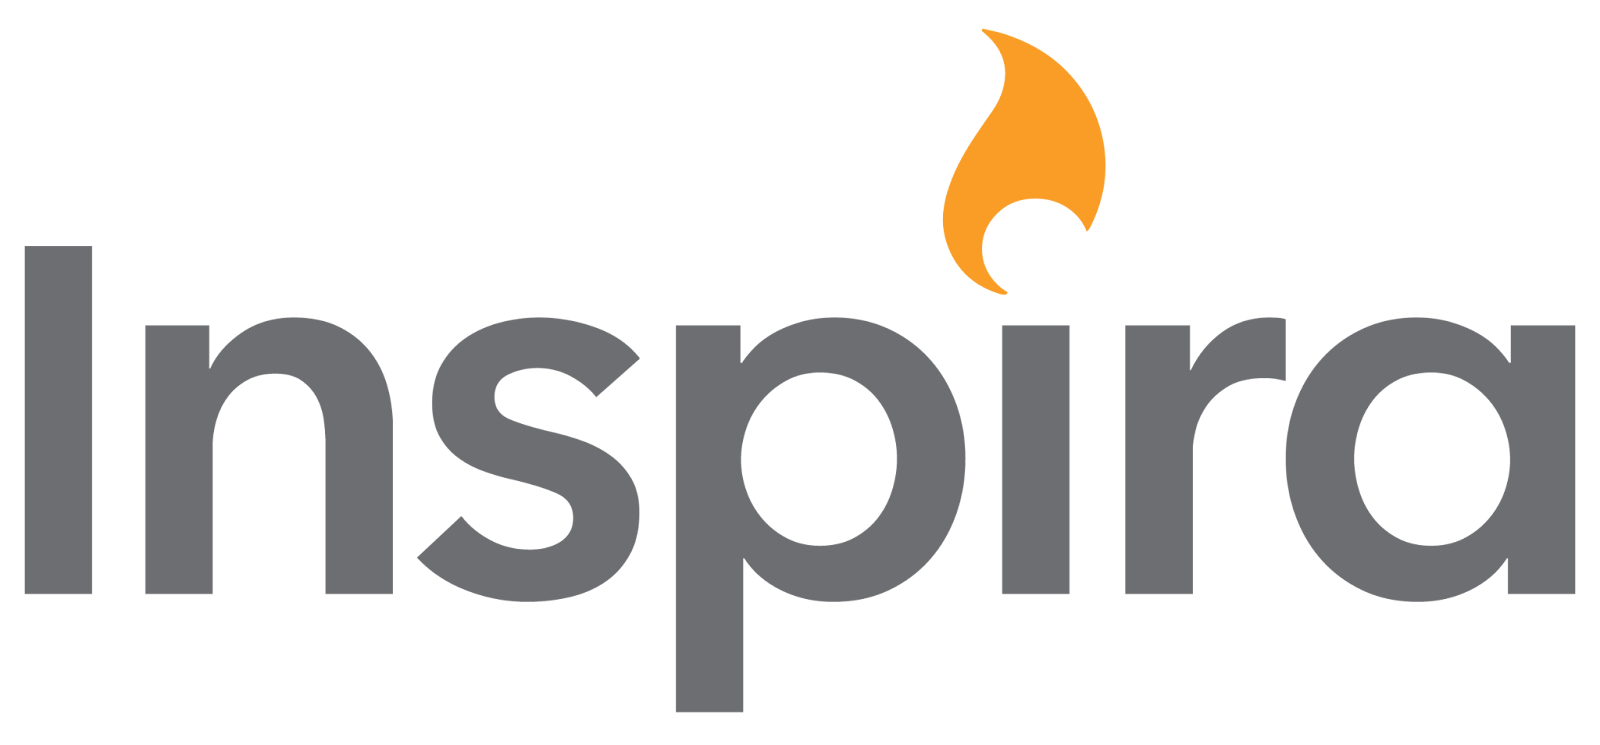 The third Inspira logo, in a soft gray with a yellow flame.